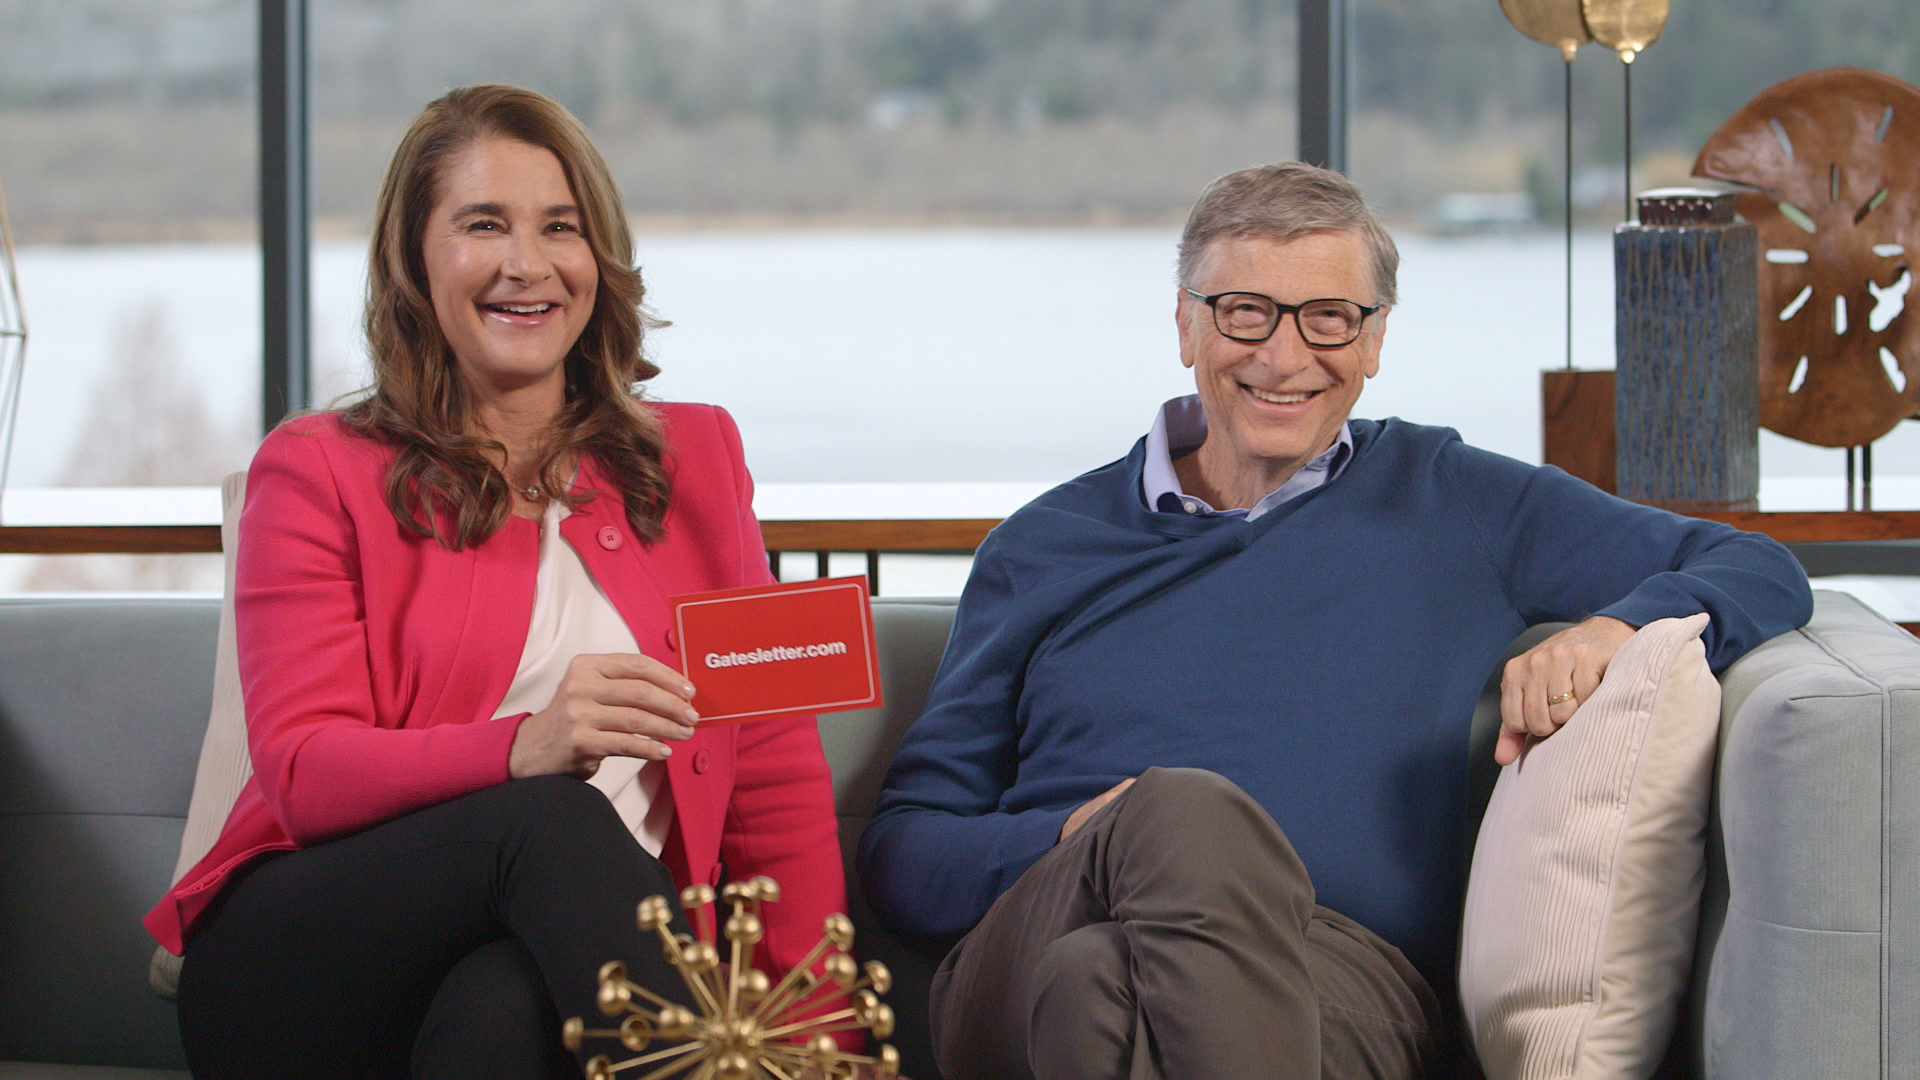 Melinda Gates reportedly consulted with divorce lawyers since 2019